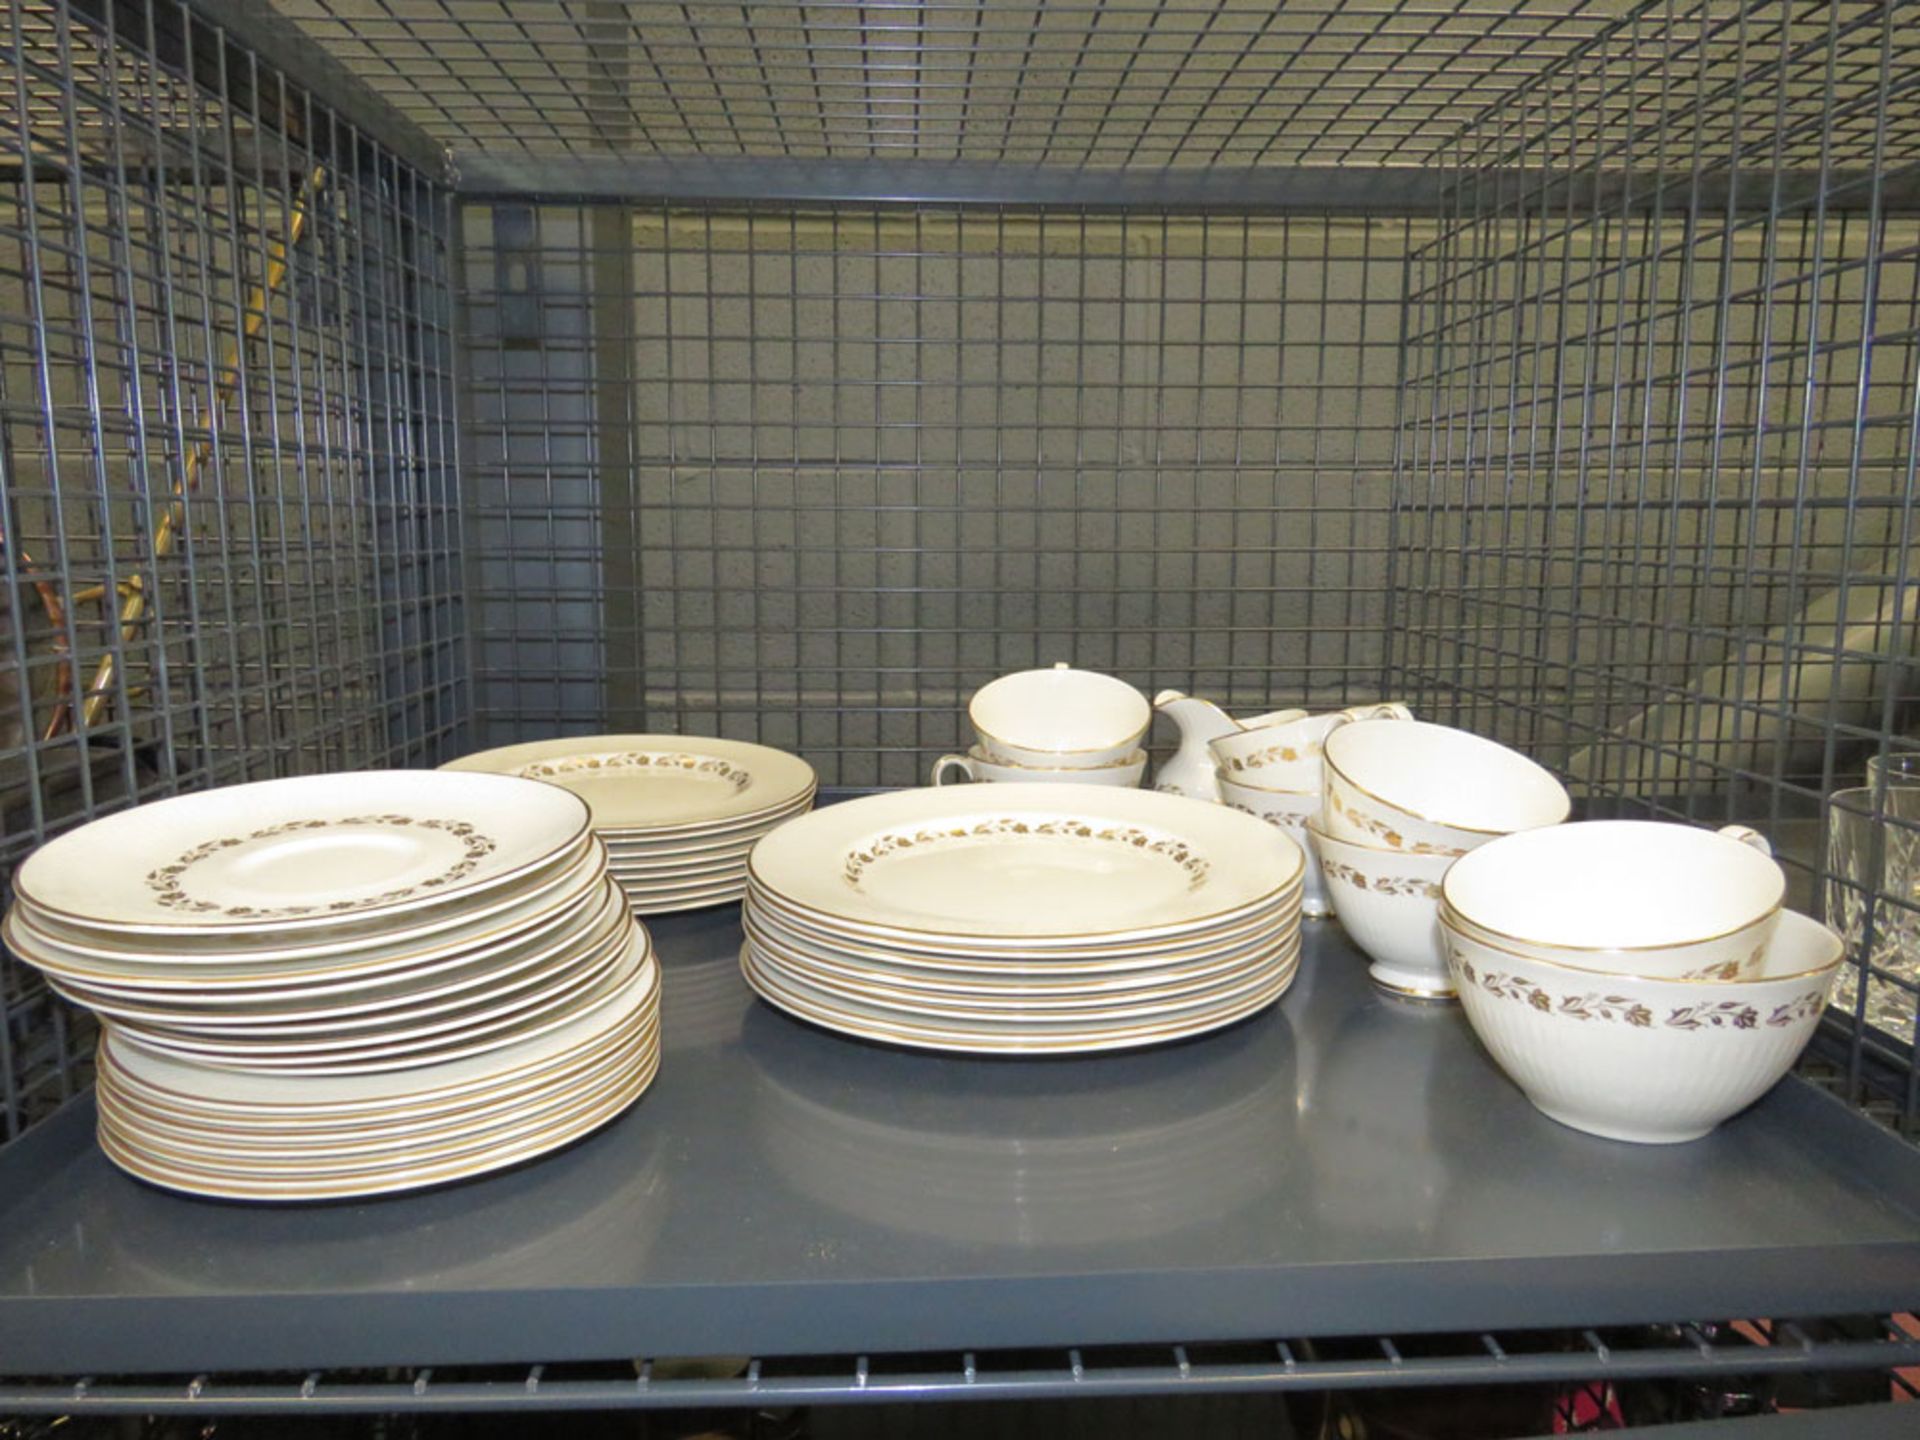 Cage containing a quantity of Royal Doulton Fairfax patterned crockery